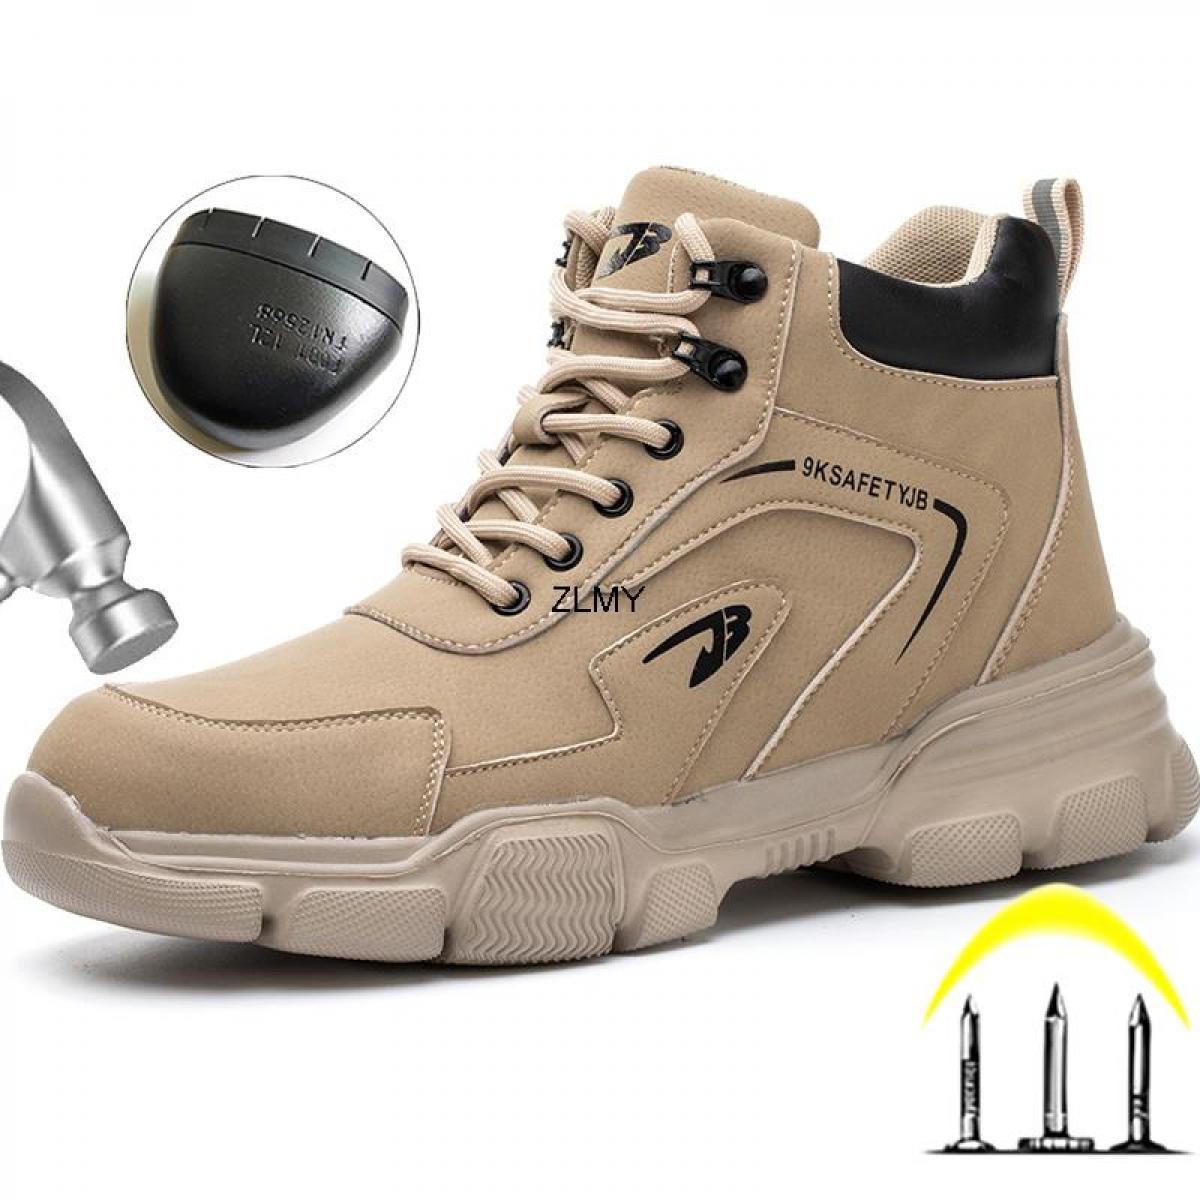 High Top Men Work Safety Boots Antistab Antishock Safety Shoes With Steel Toe Cap Work Shoes Male Industrial Protective 